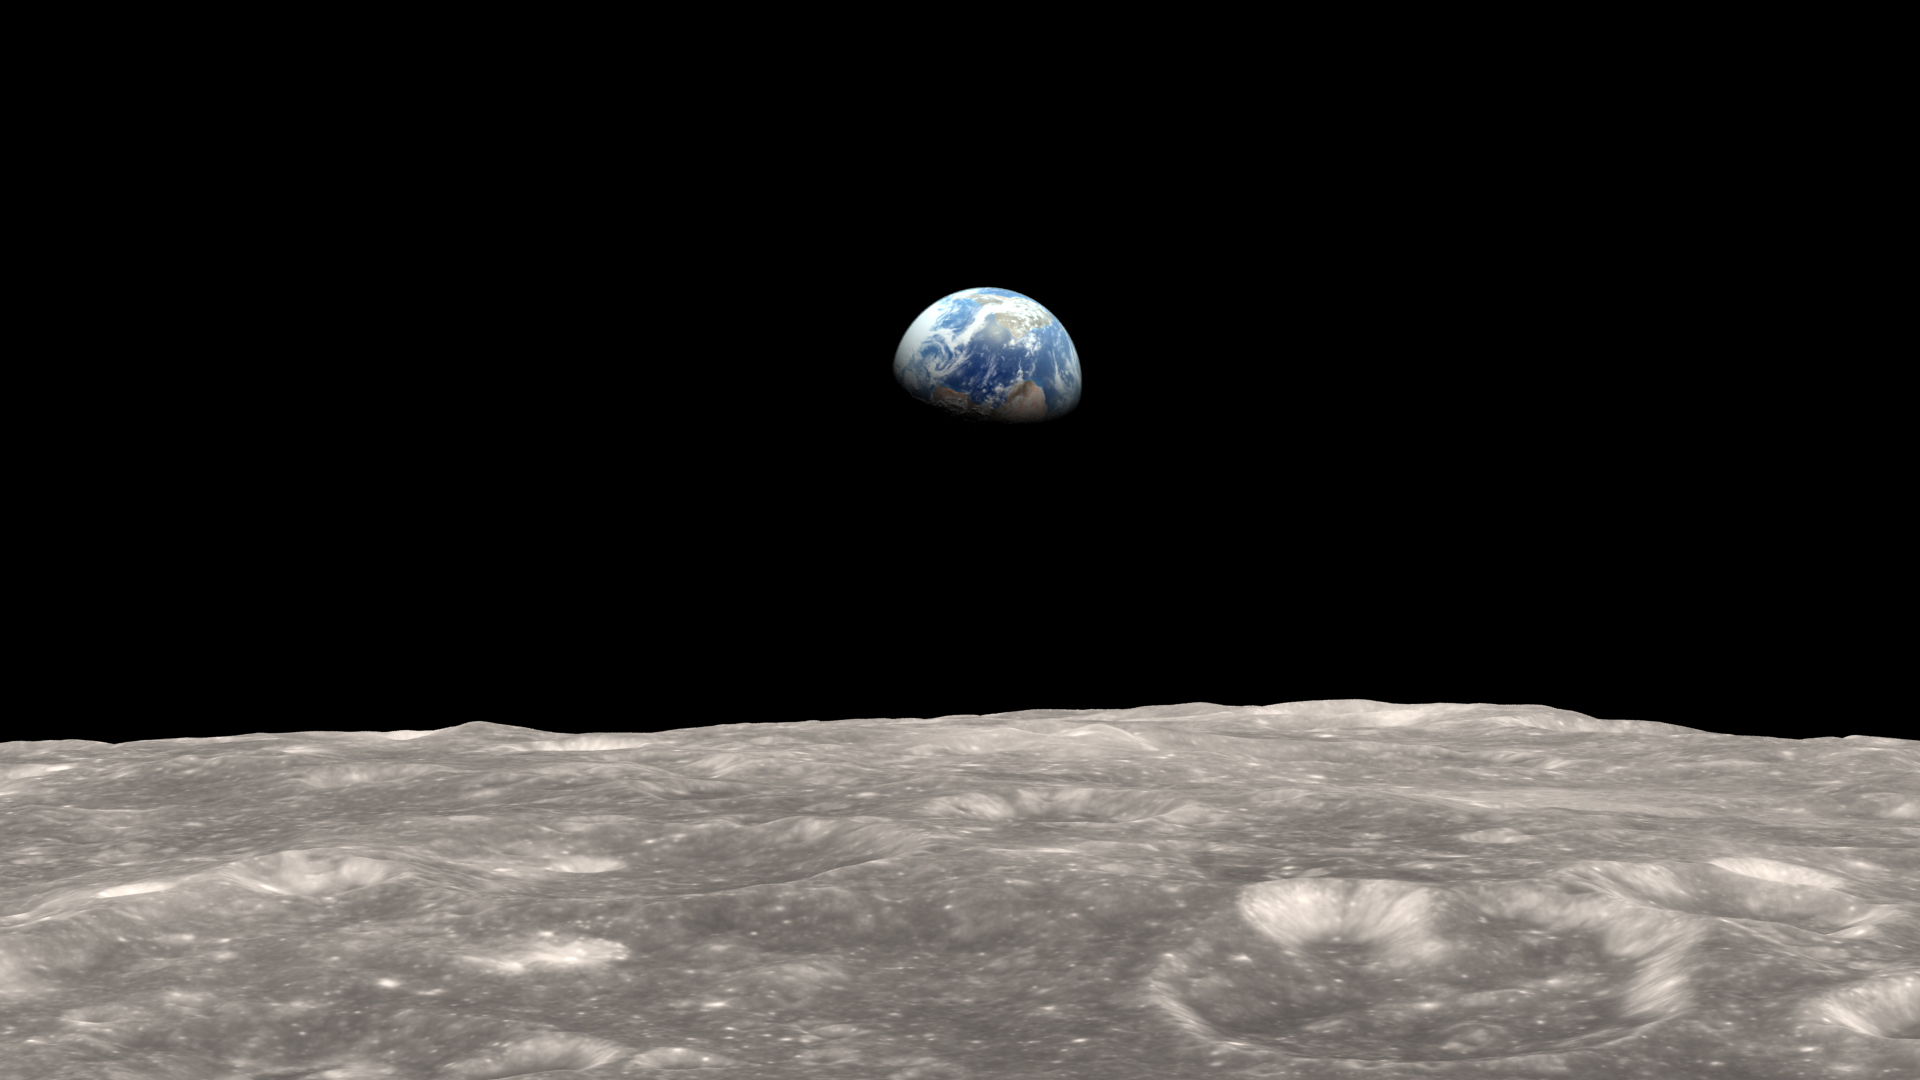 Dark Side Of The Moon Wallpaper 14956 Hd Wallpapers - Earth Rise On The Moon - HD Wallpaper 